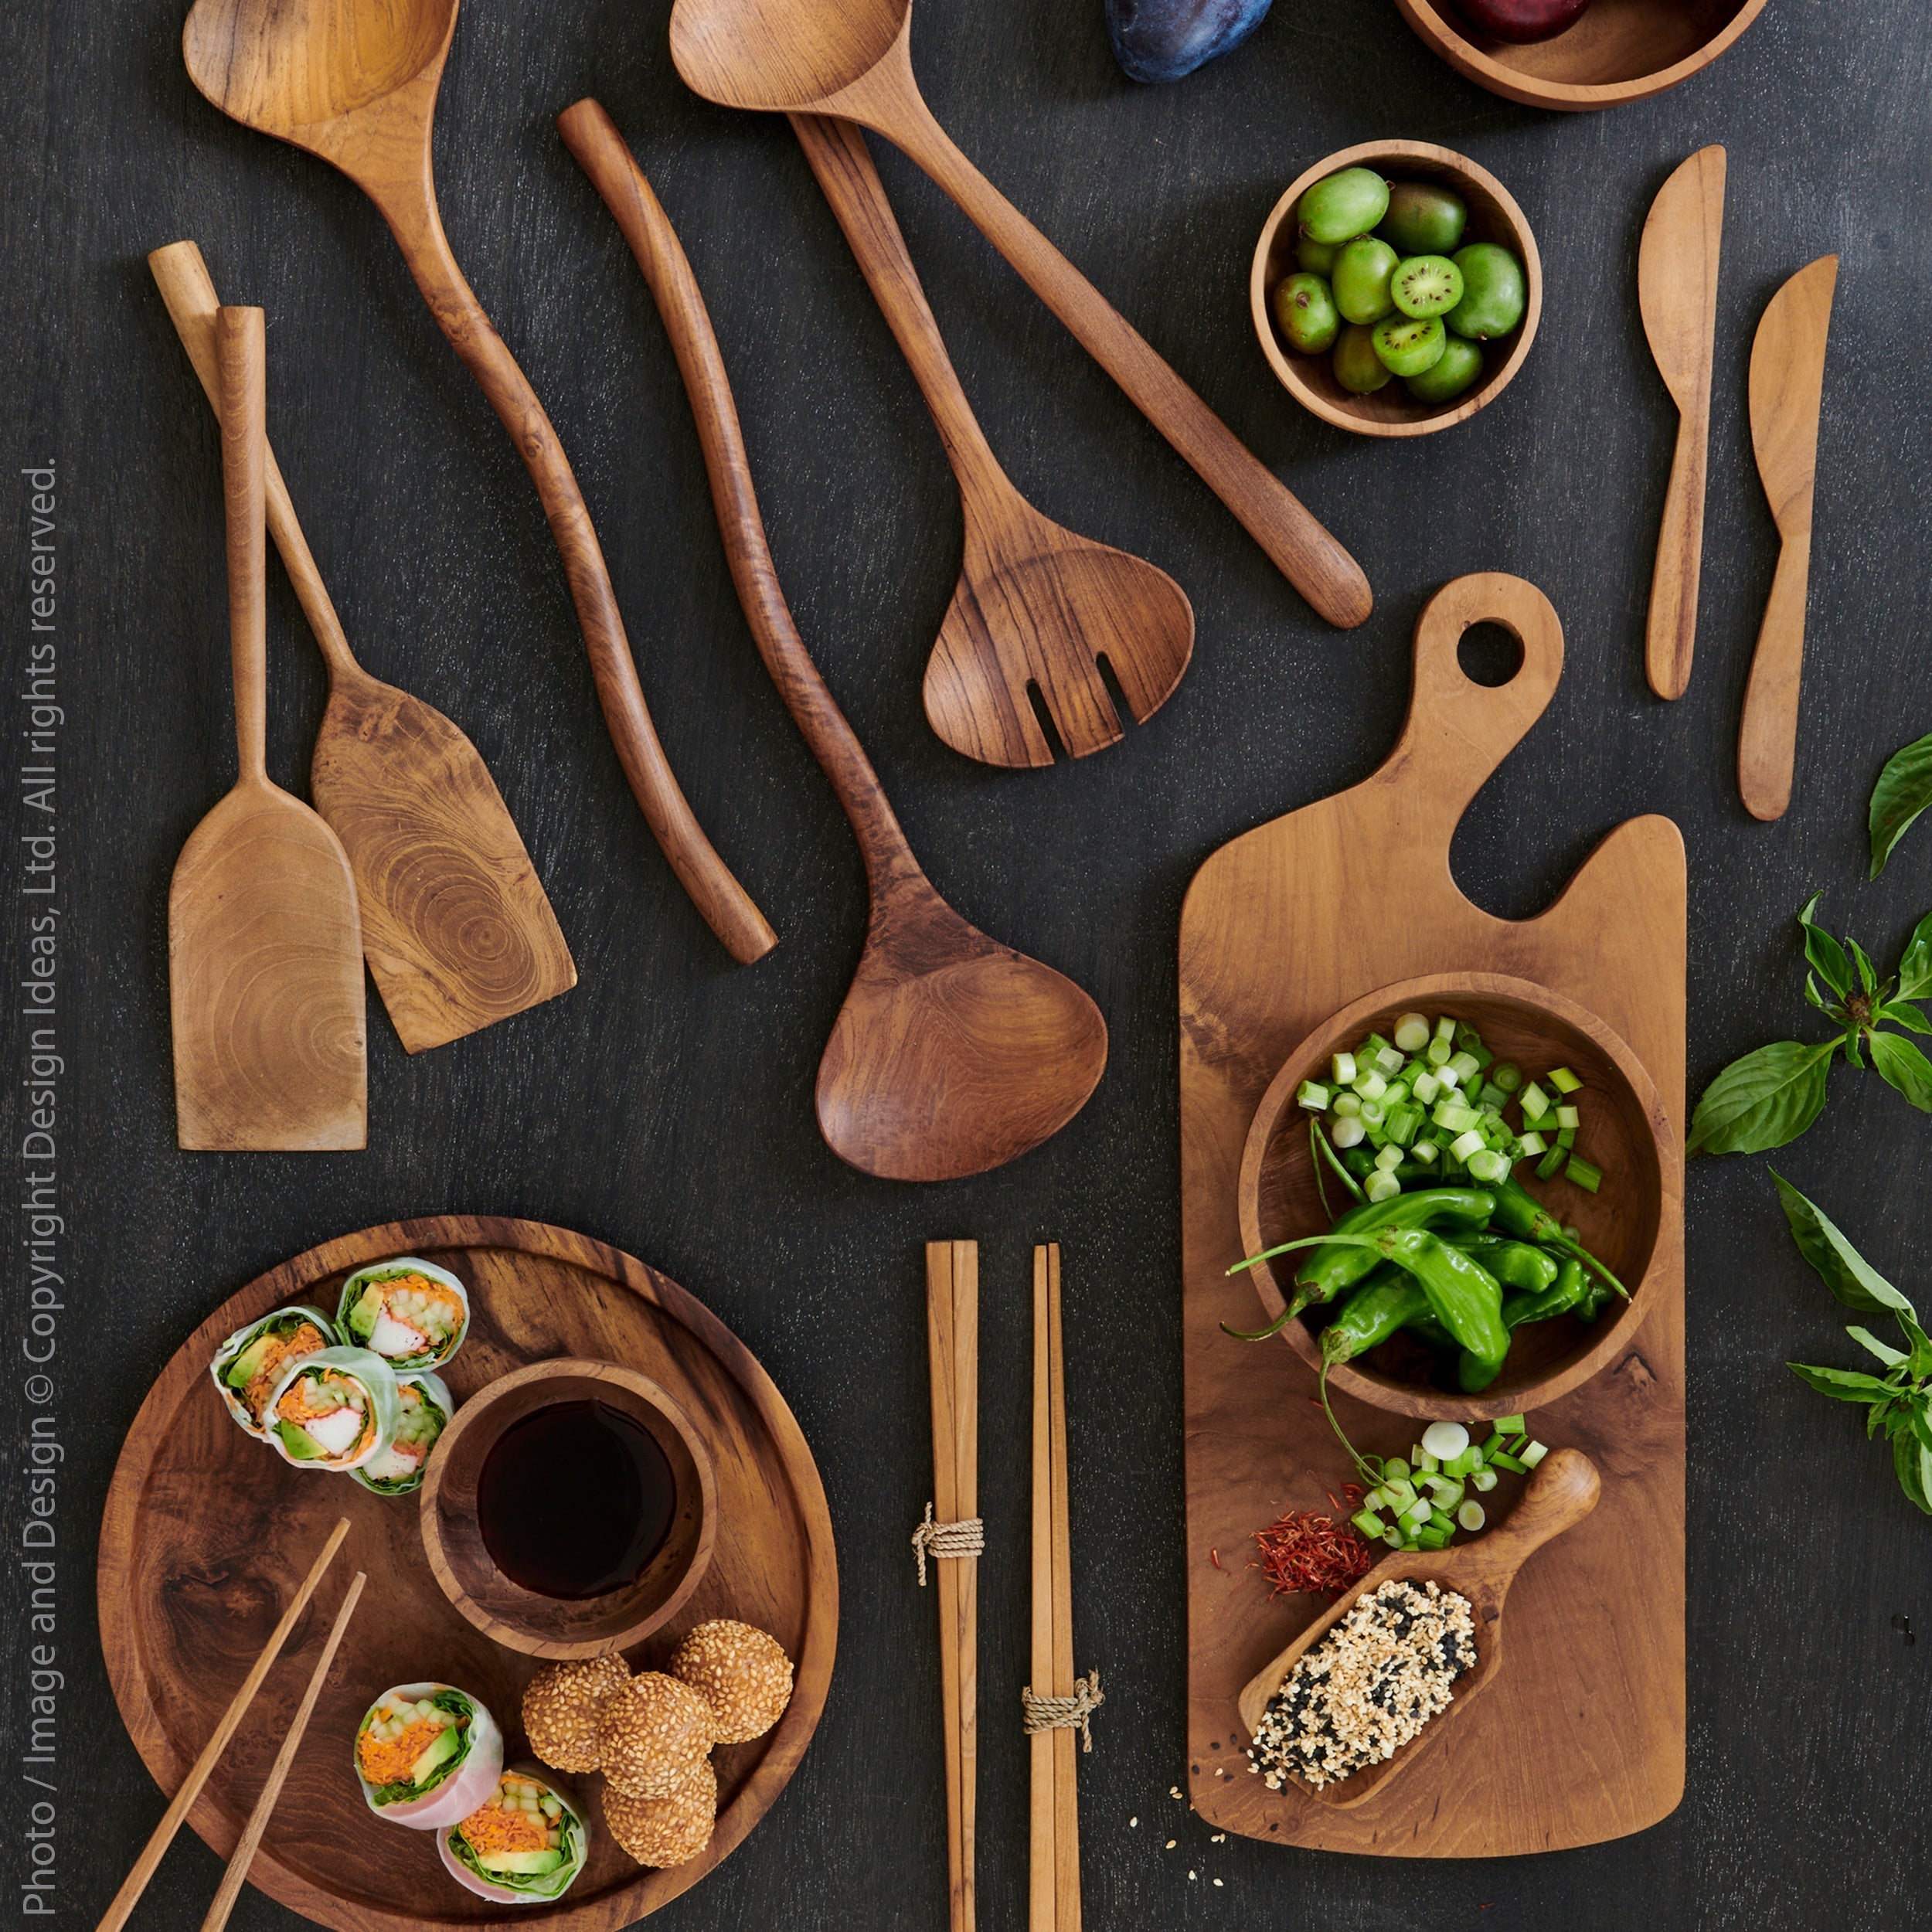 Chiku Teak Chopsticks Natural Color | Image 3 | From the Chiku Collection | Masterfully assembled with natural teak for long lasting use | These utensils are sustainably sourced | Available in natural color | texxture home